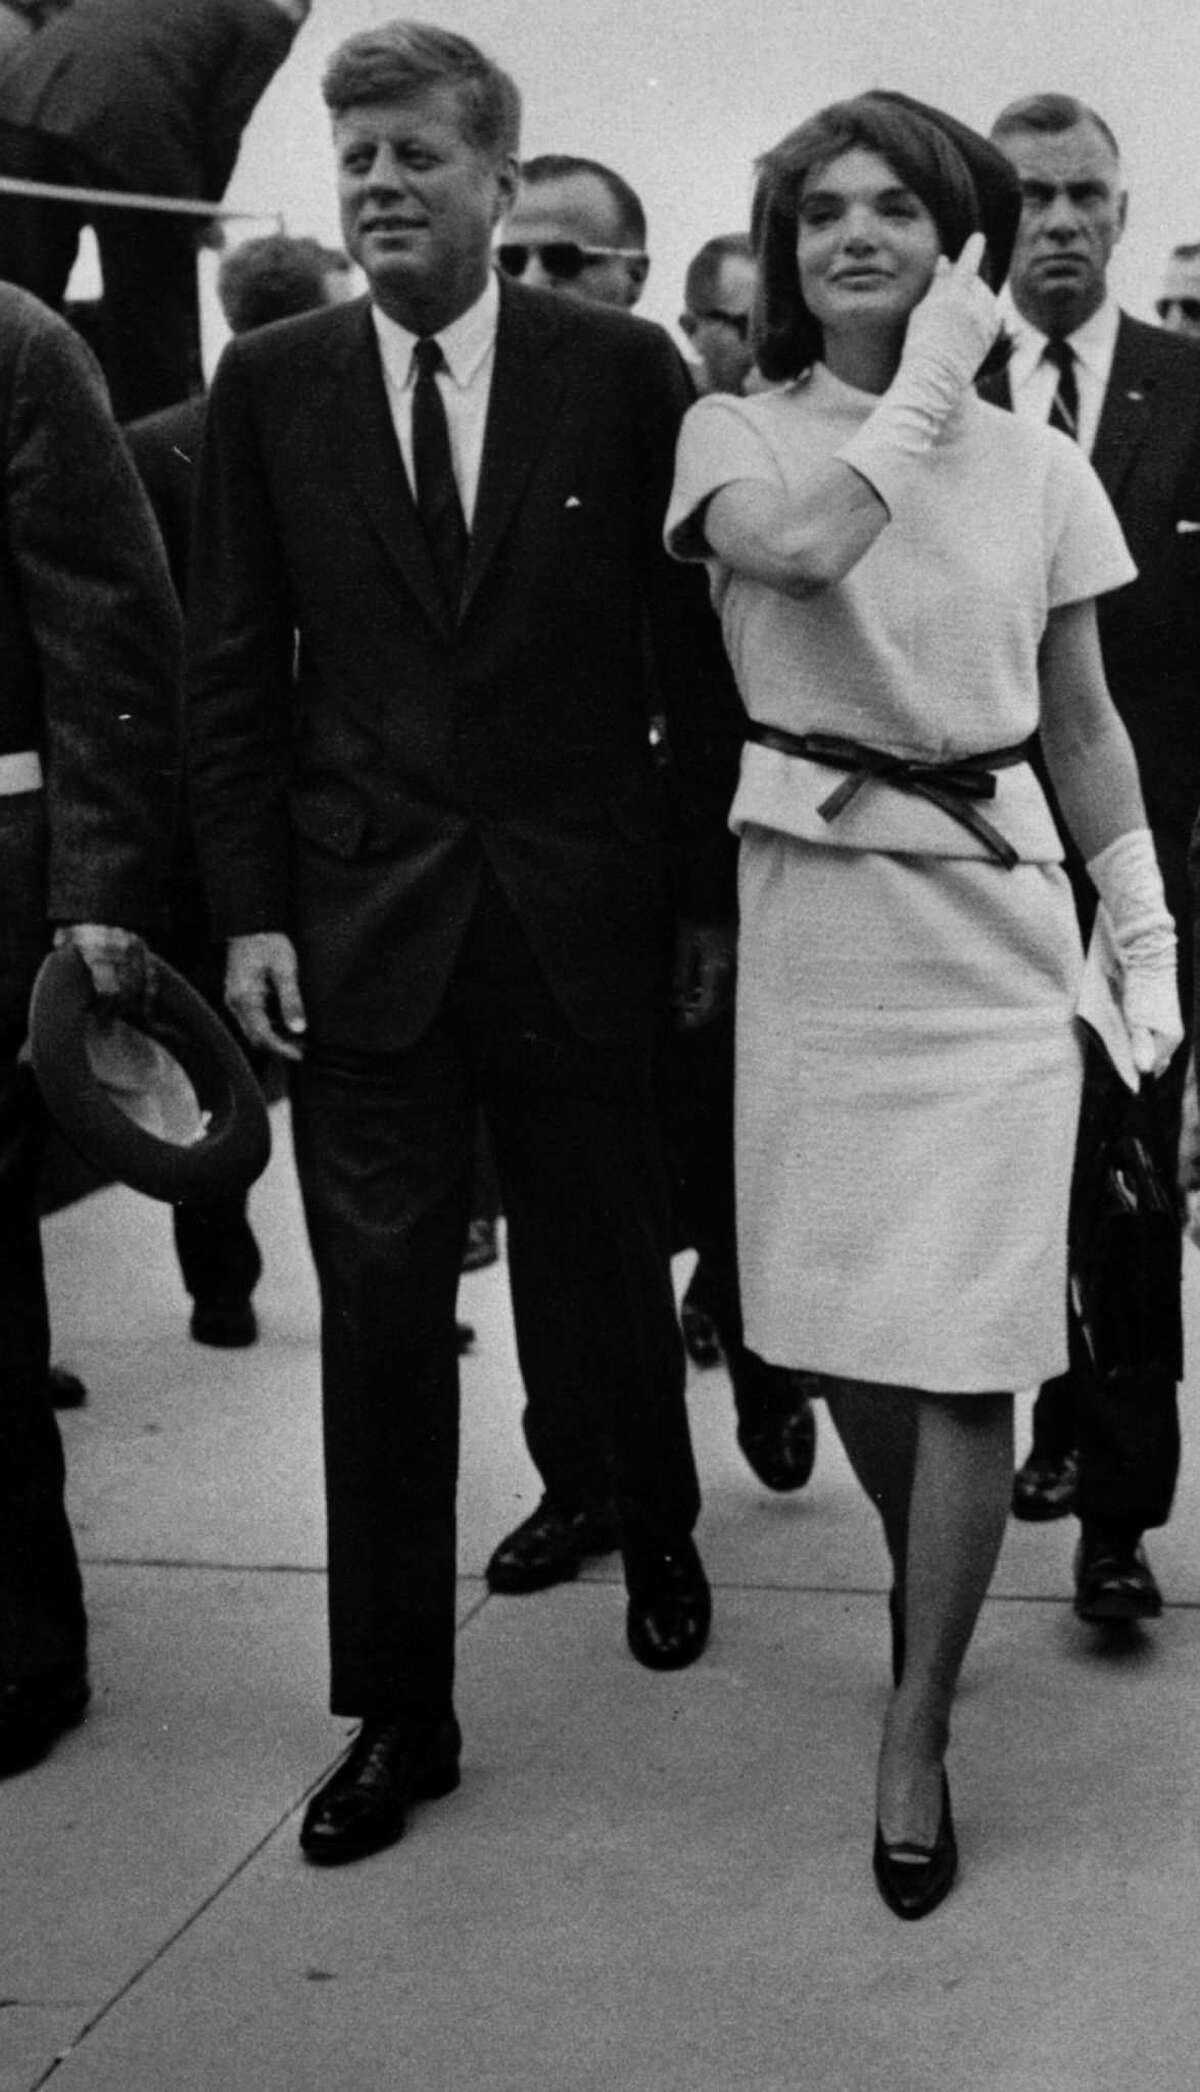 President John F. Kennedy and his wife, Jacqueline, are surrounded by security during their visit to San Antonio on Nov. 21, 1963, one day before his assassination in Dallas.